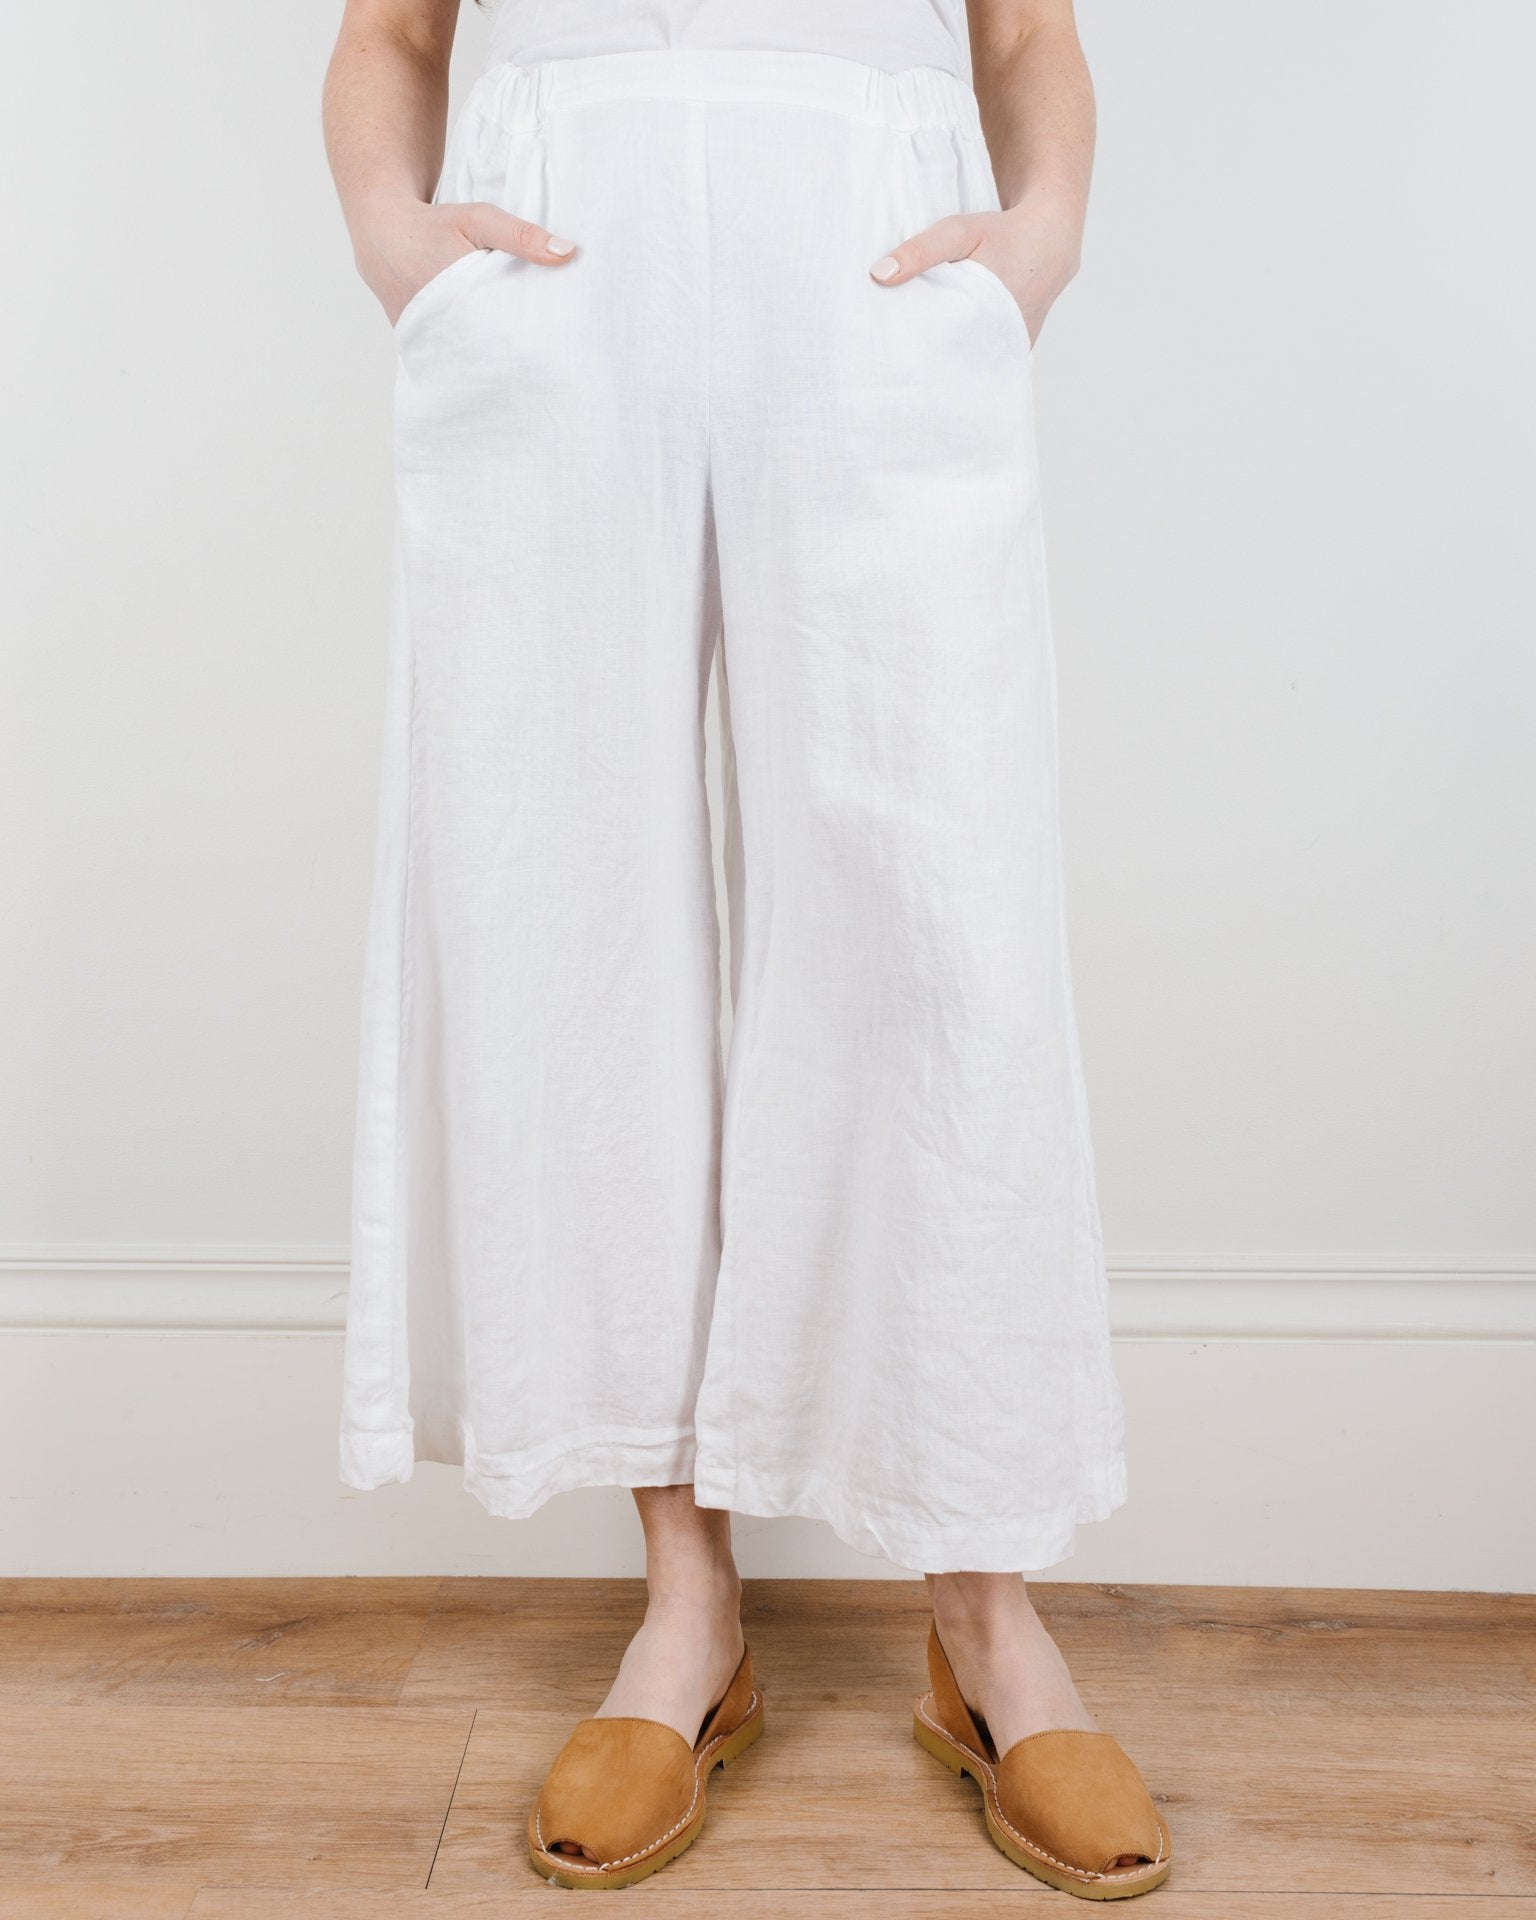 CP Shades Wendy Pant in White Linen- Bliss Boutiques